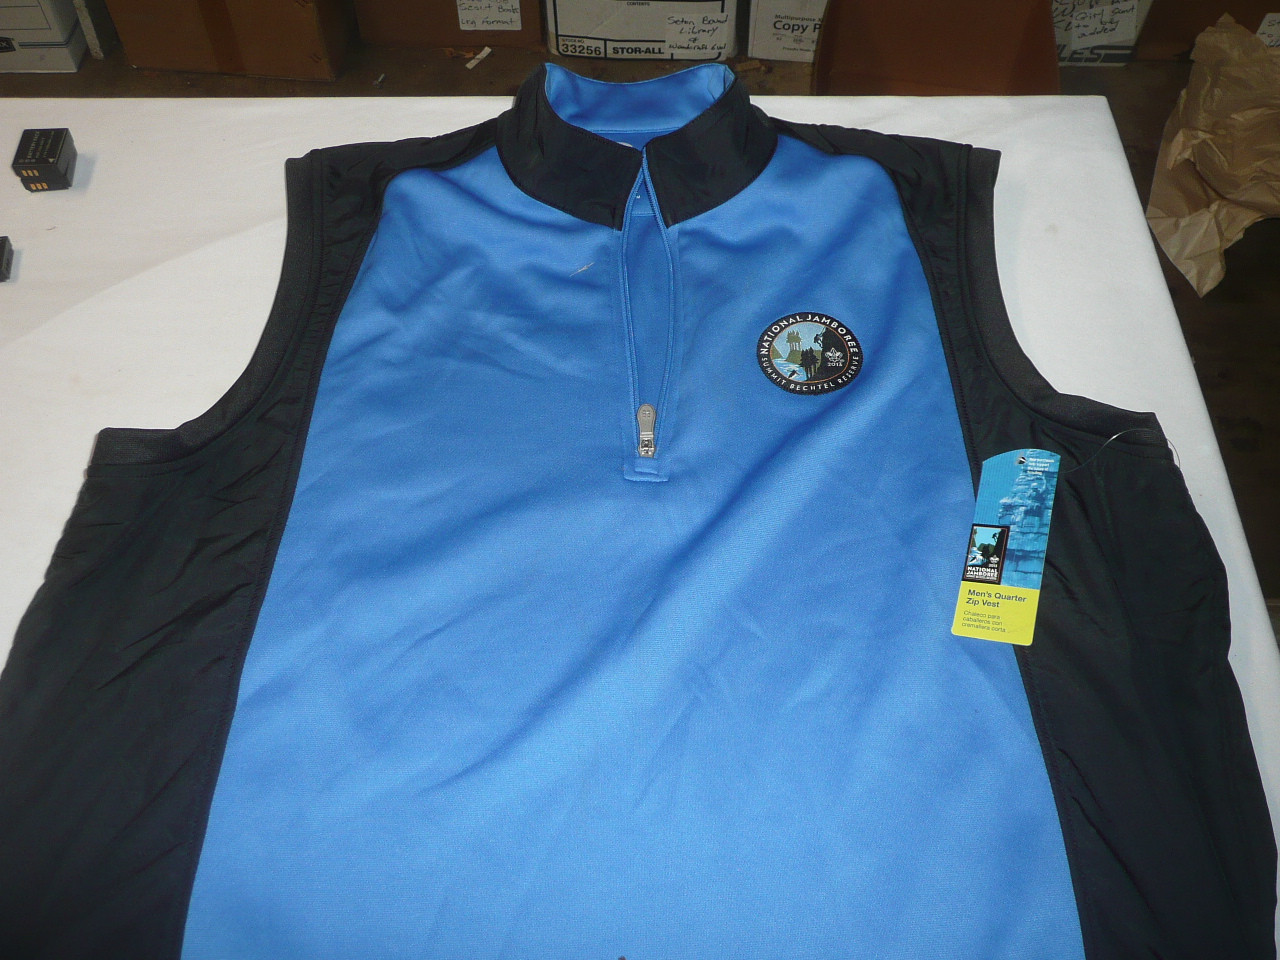 2013 National Jamboree Official Sleeveless Pullover Shirt, 2XL Size, Unused